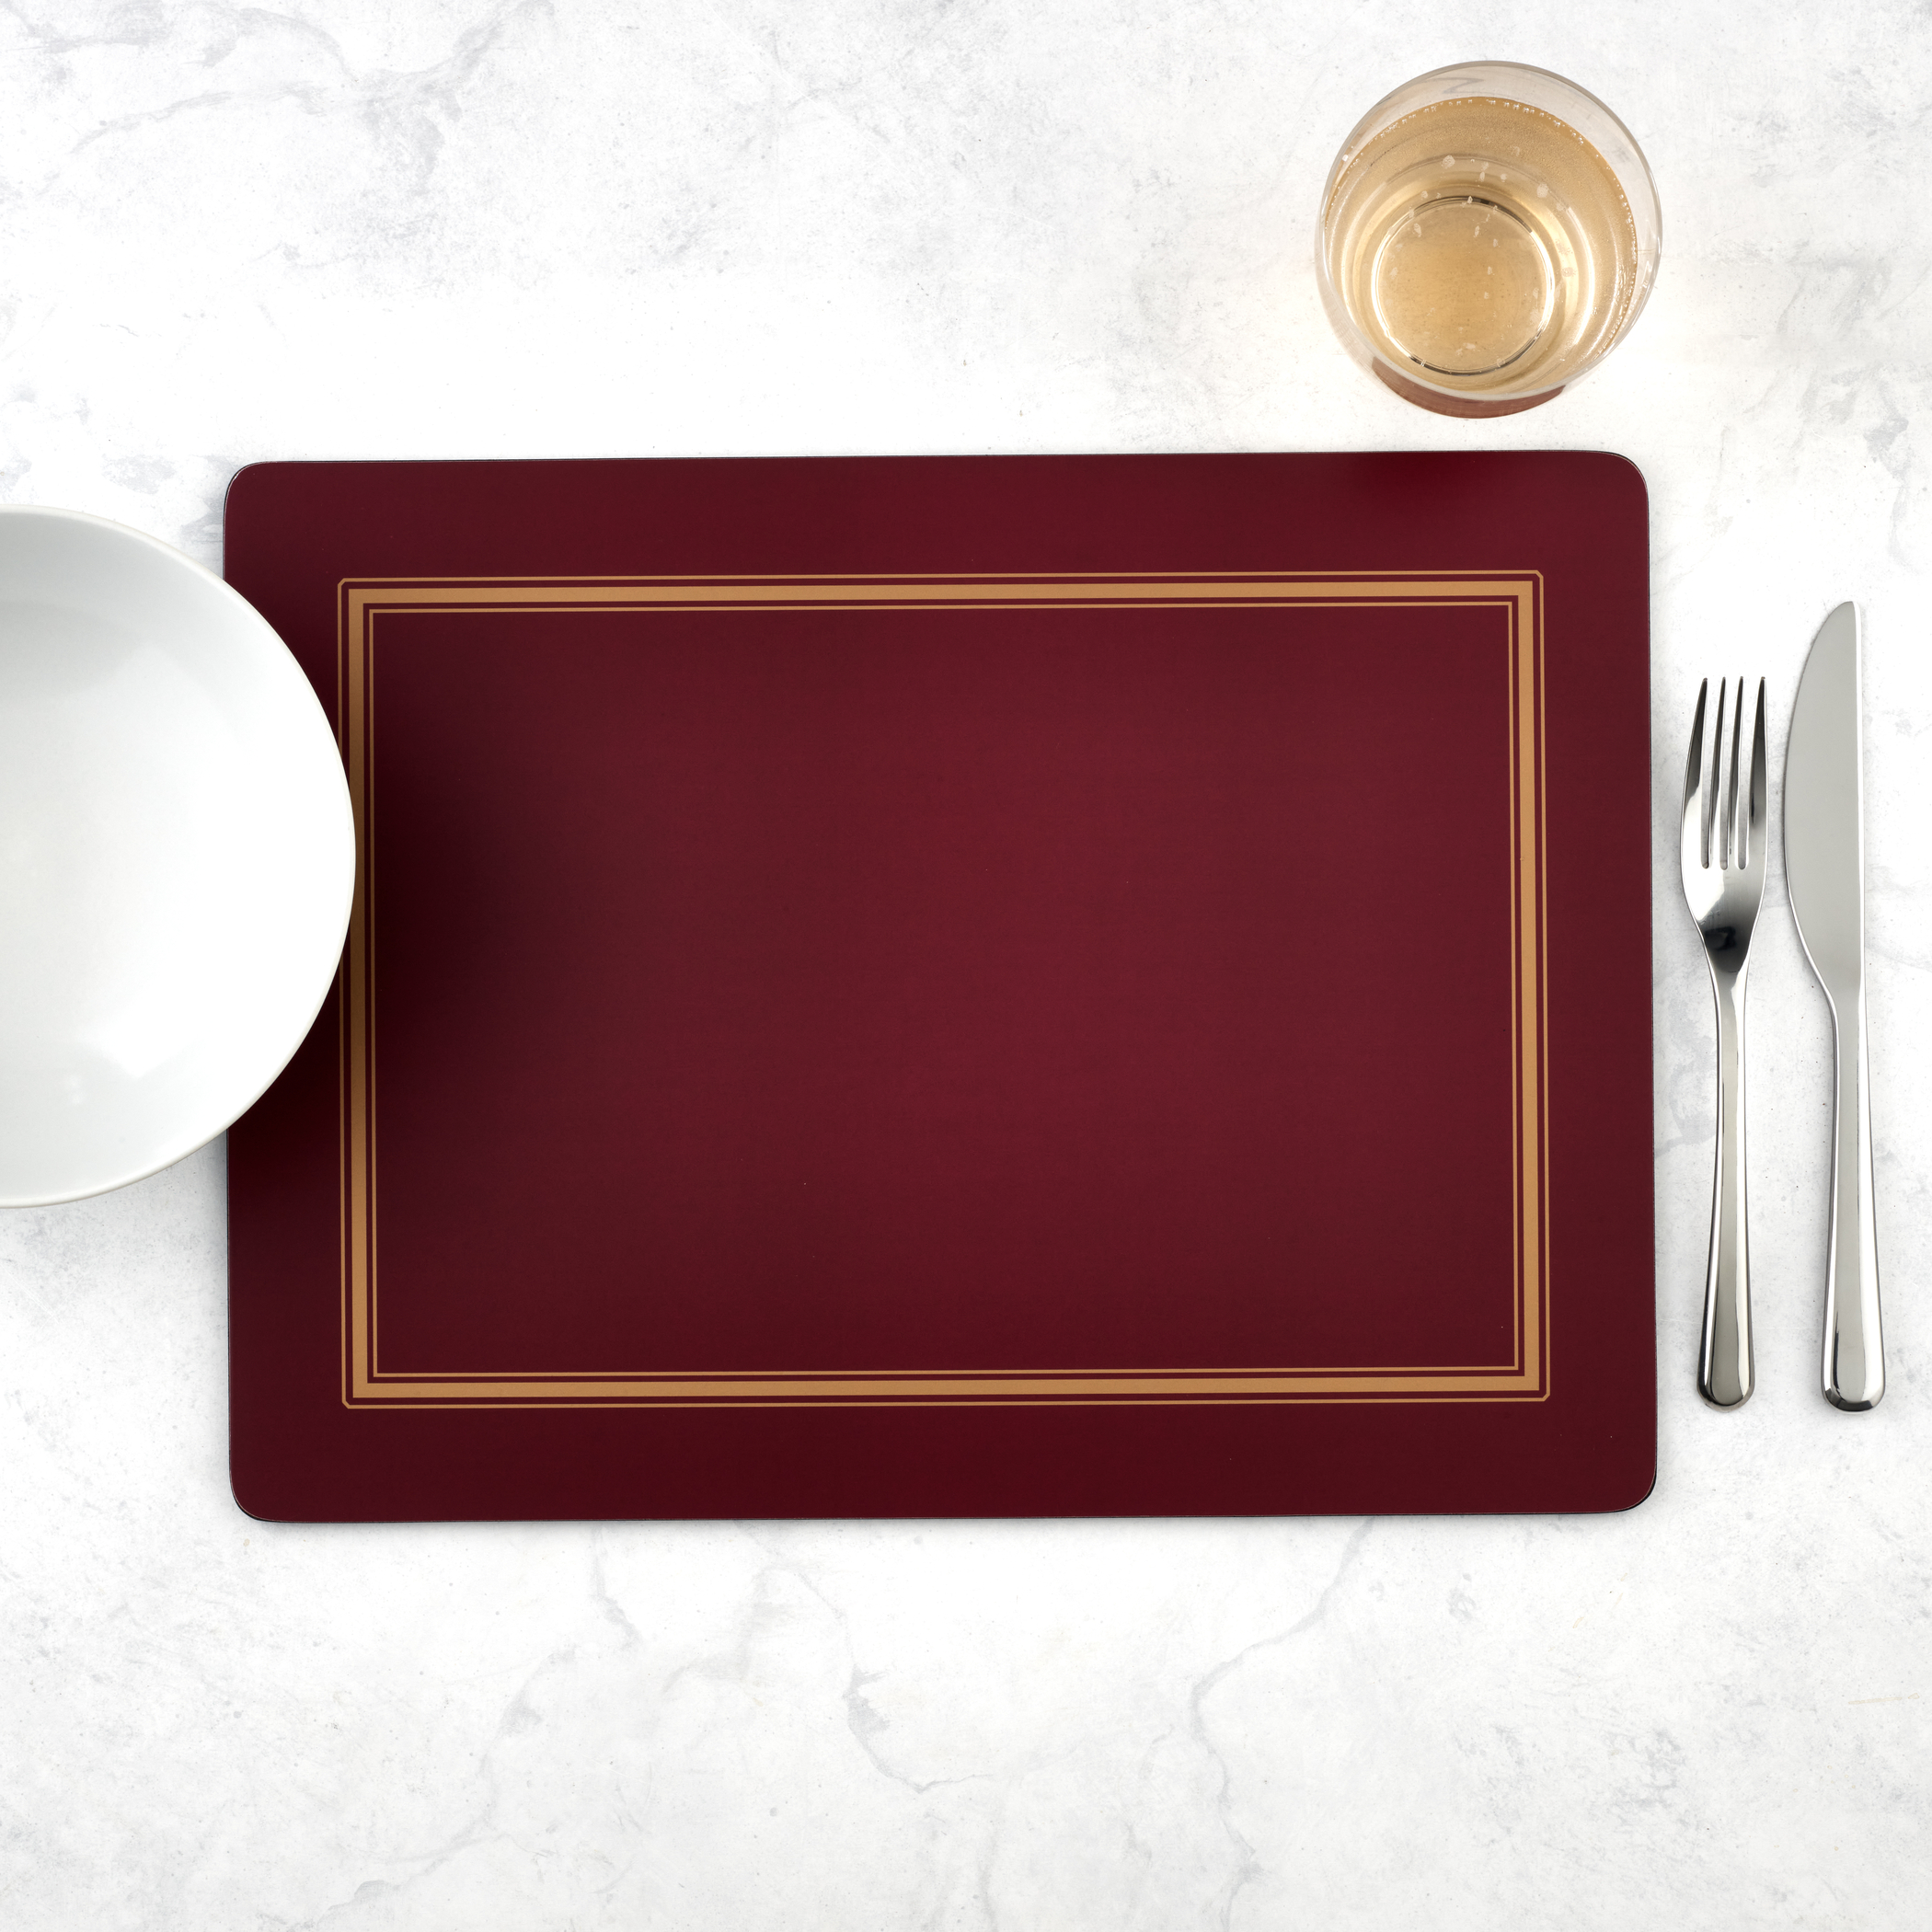 6 Placemats 6 Coasters Pimpernel Classic Burgundy